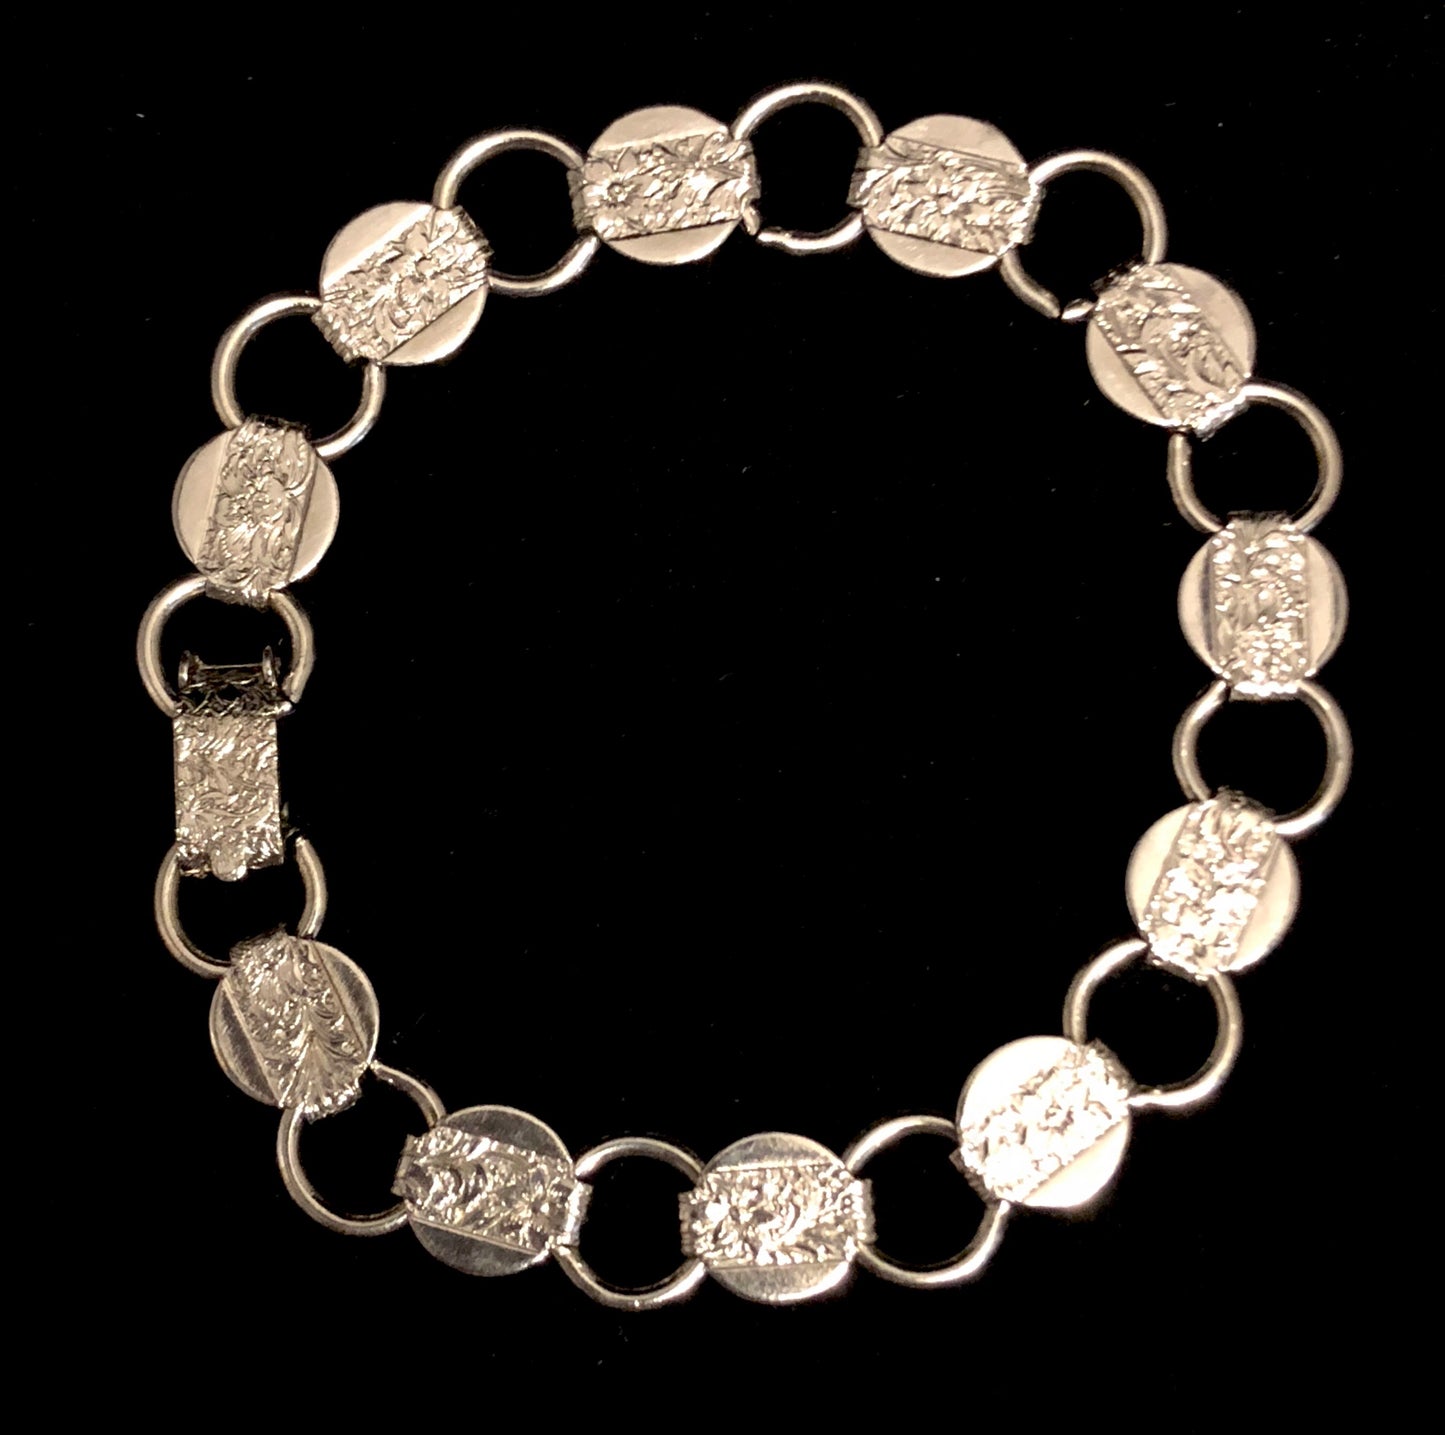 1959 Sarah Coventry Young & Gay Silver Bracelet - Retro Kandy Vintage